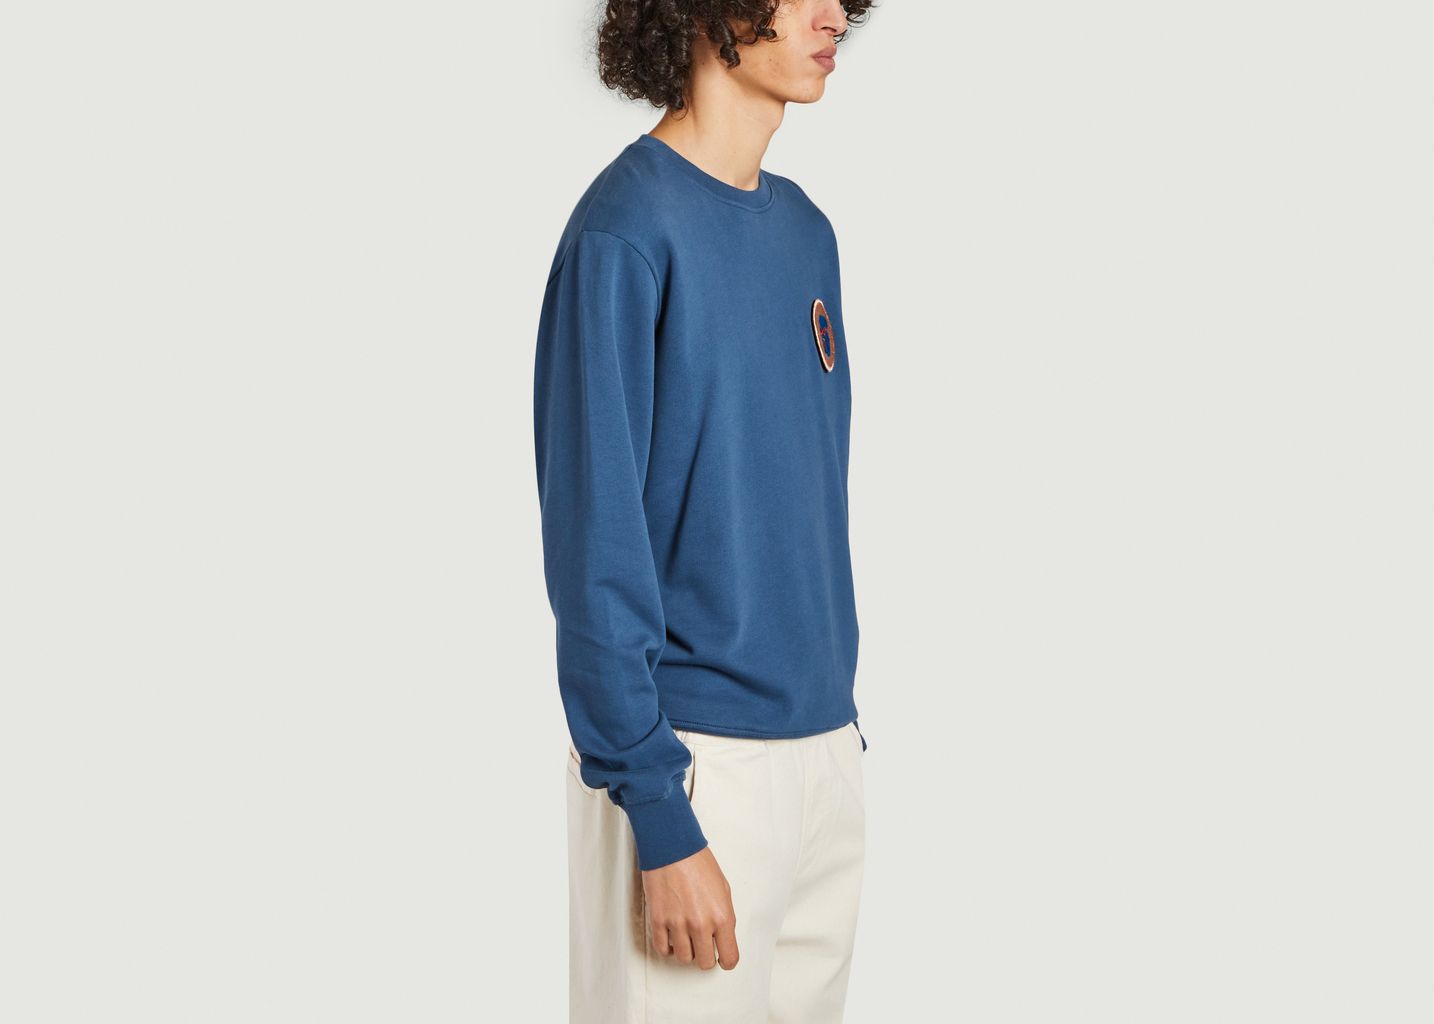 Scratchy Sweatshirt with 3 embroidered patches to scratch - Olow